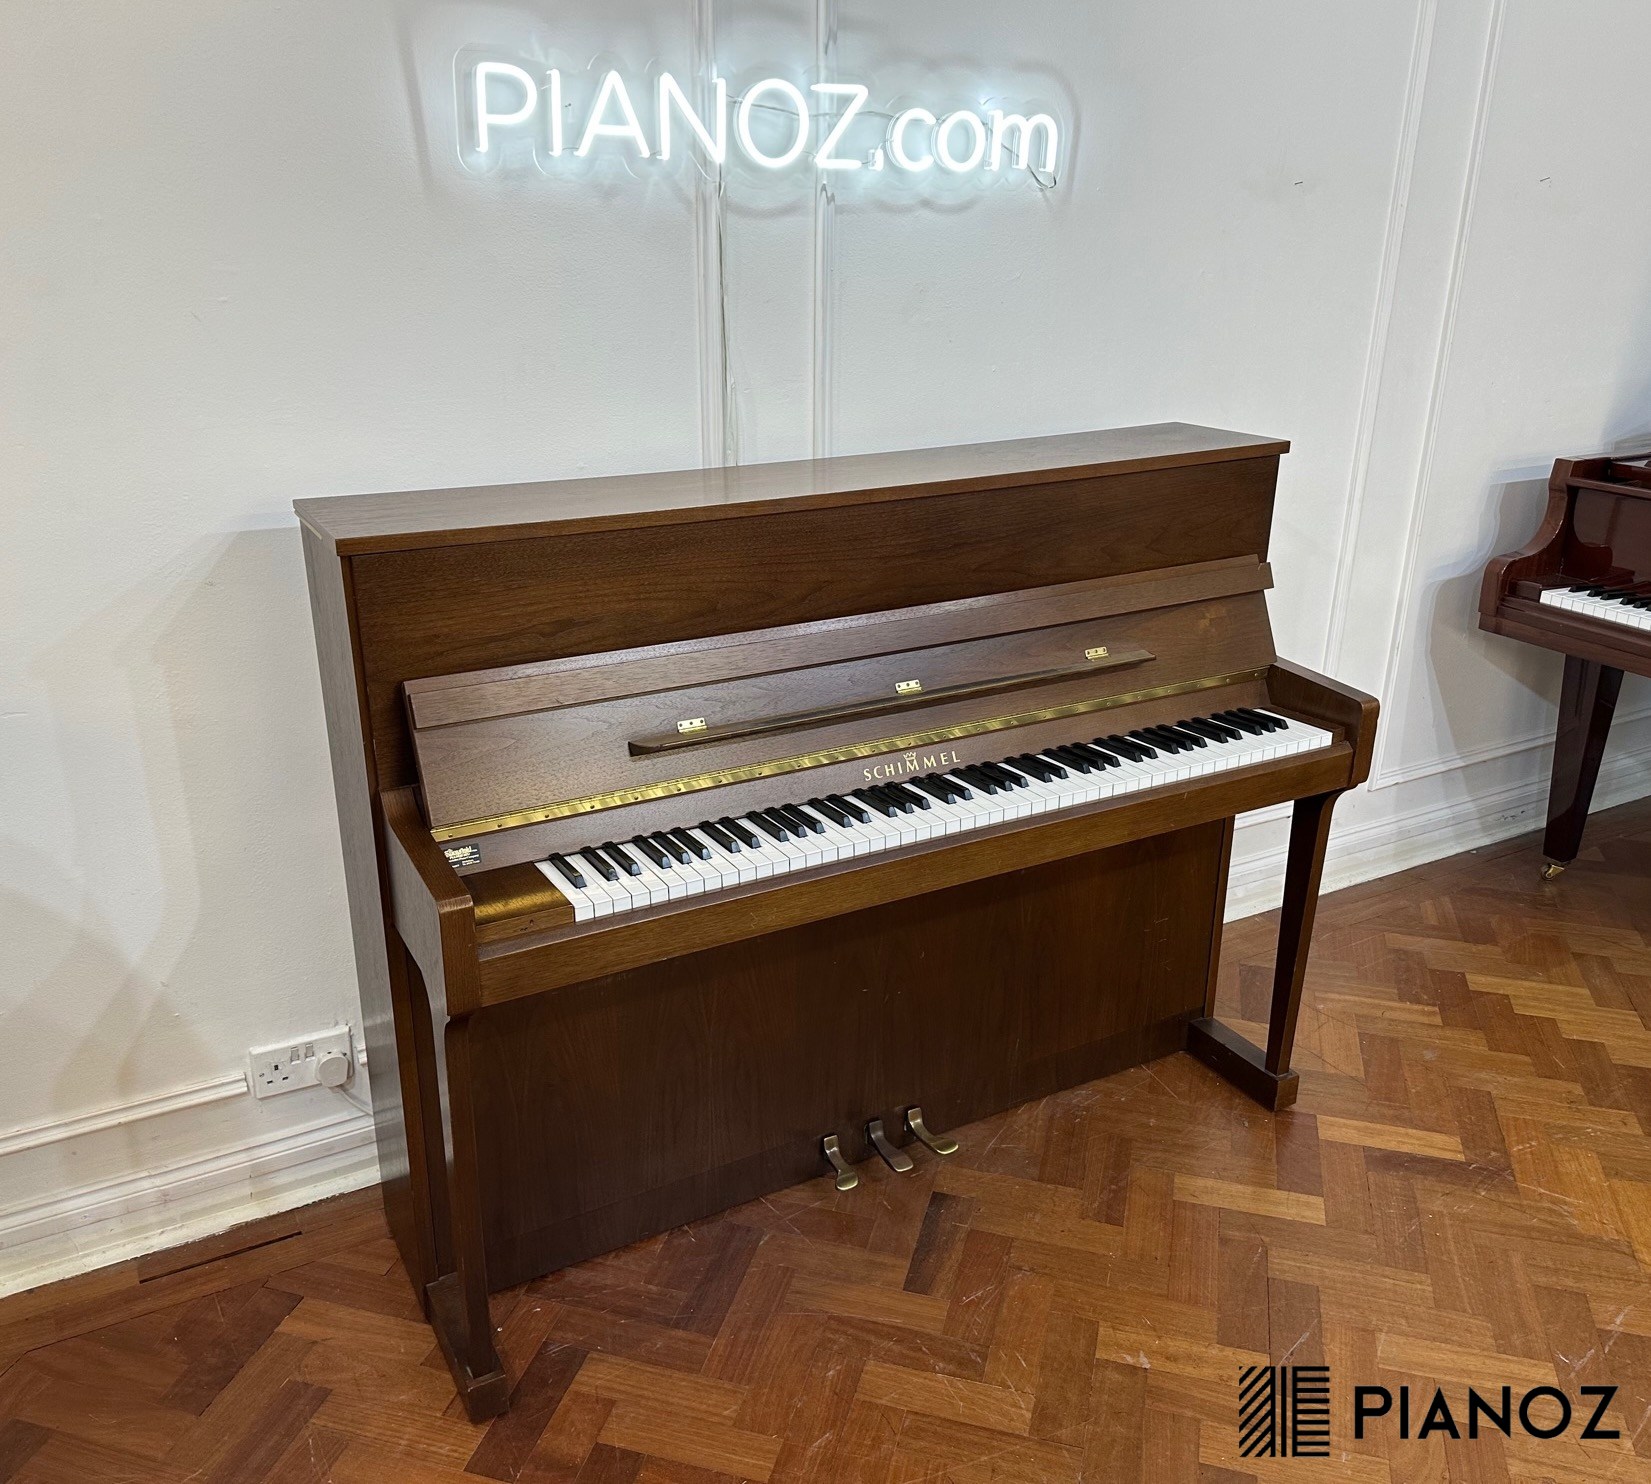 Schimmel 116 German Upright Piano piano for sale in UK